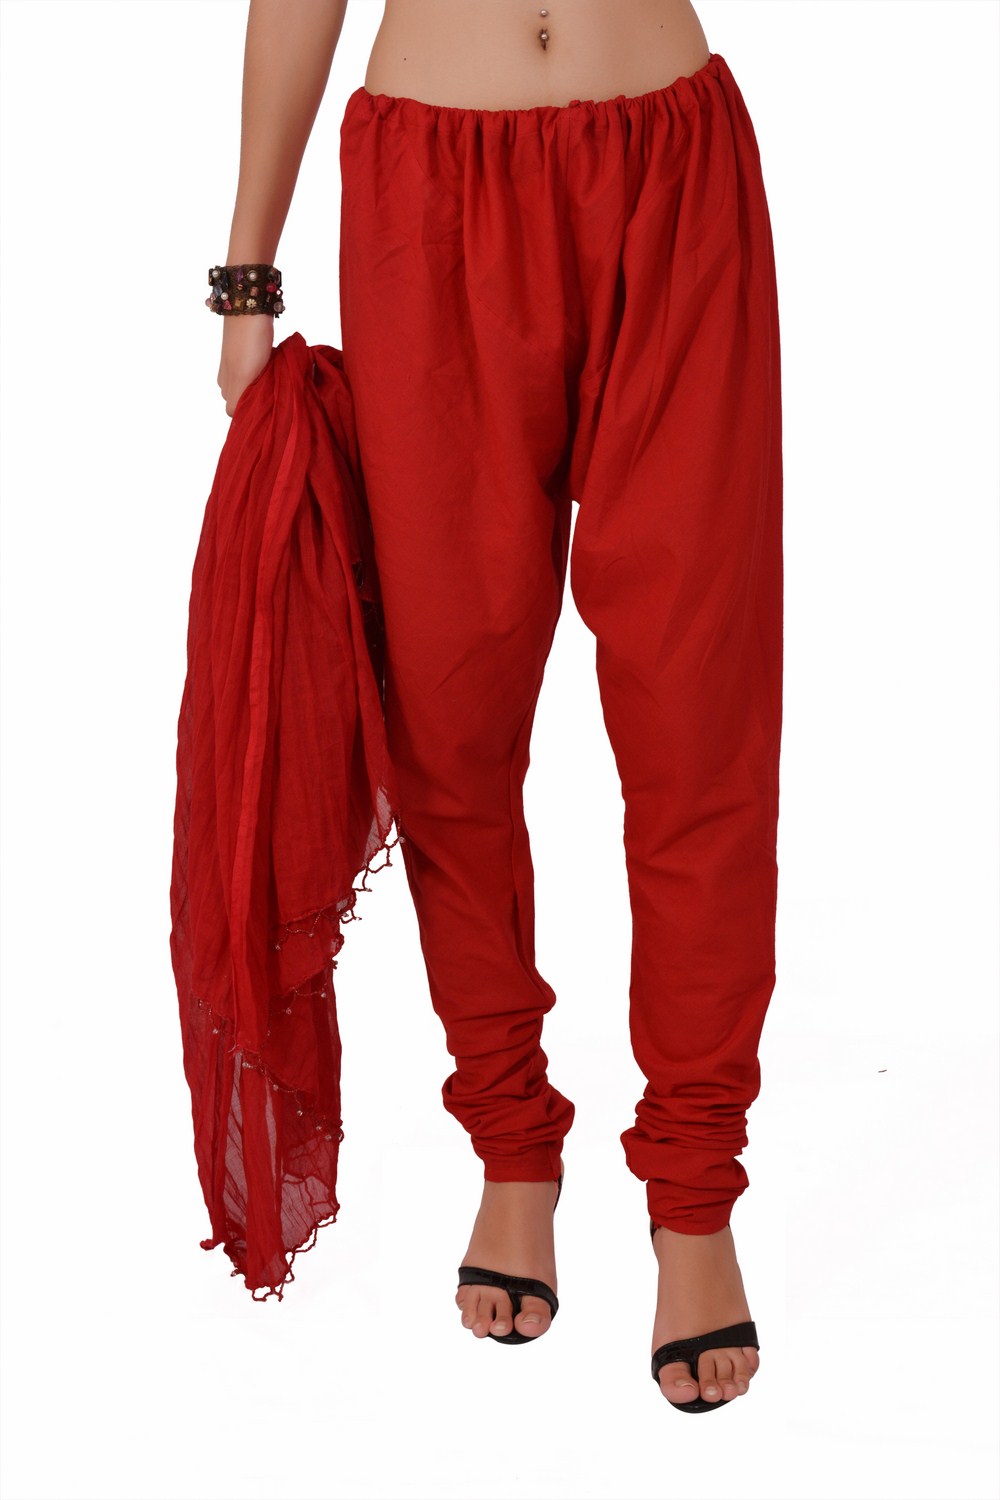 Stylenmart Red Cotton Churidar Pant Dupatta Set Prices in India ...